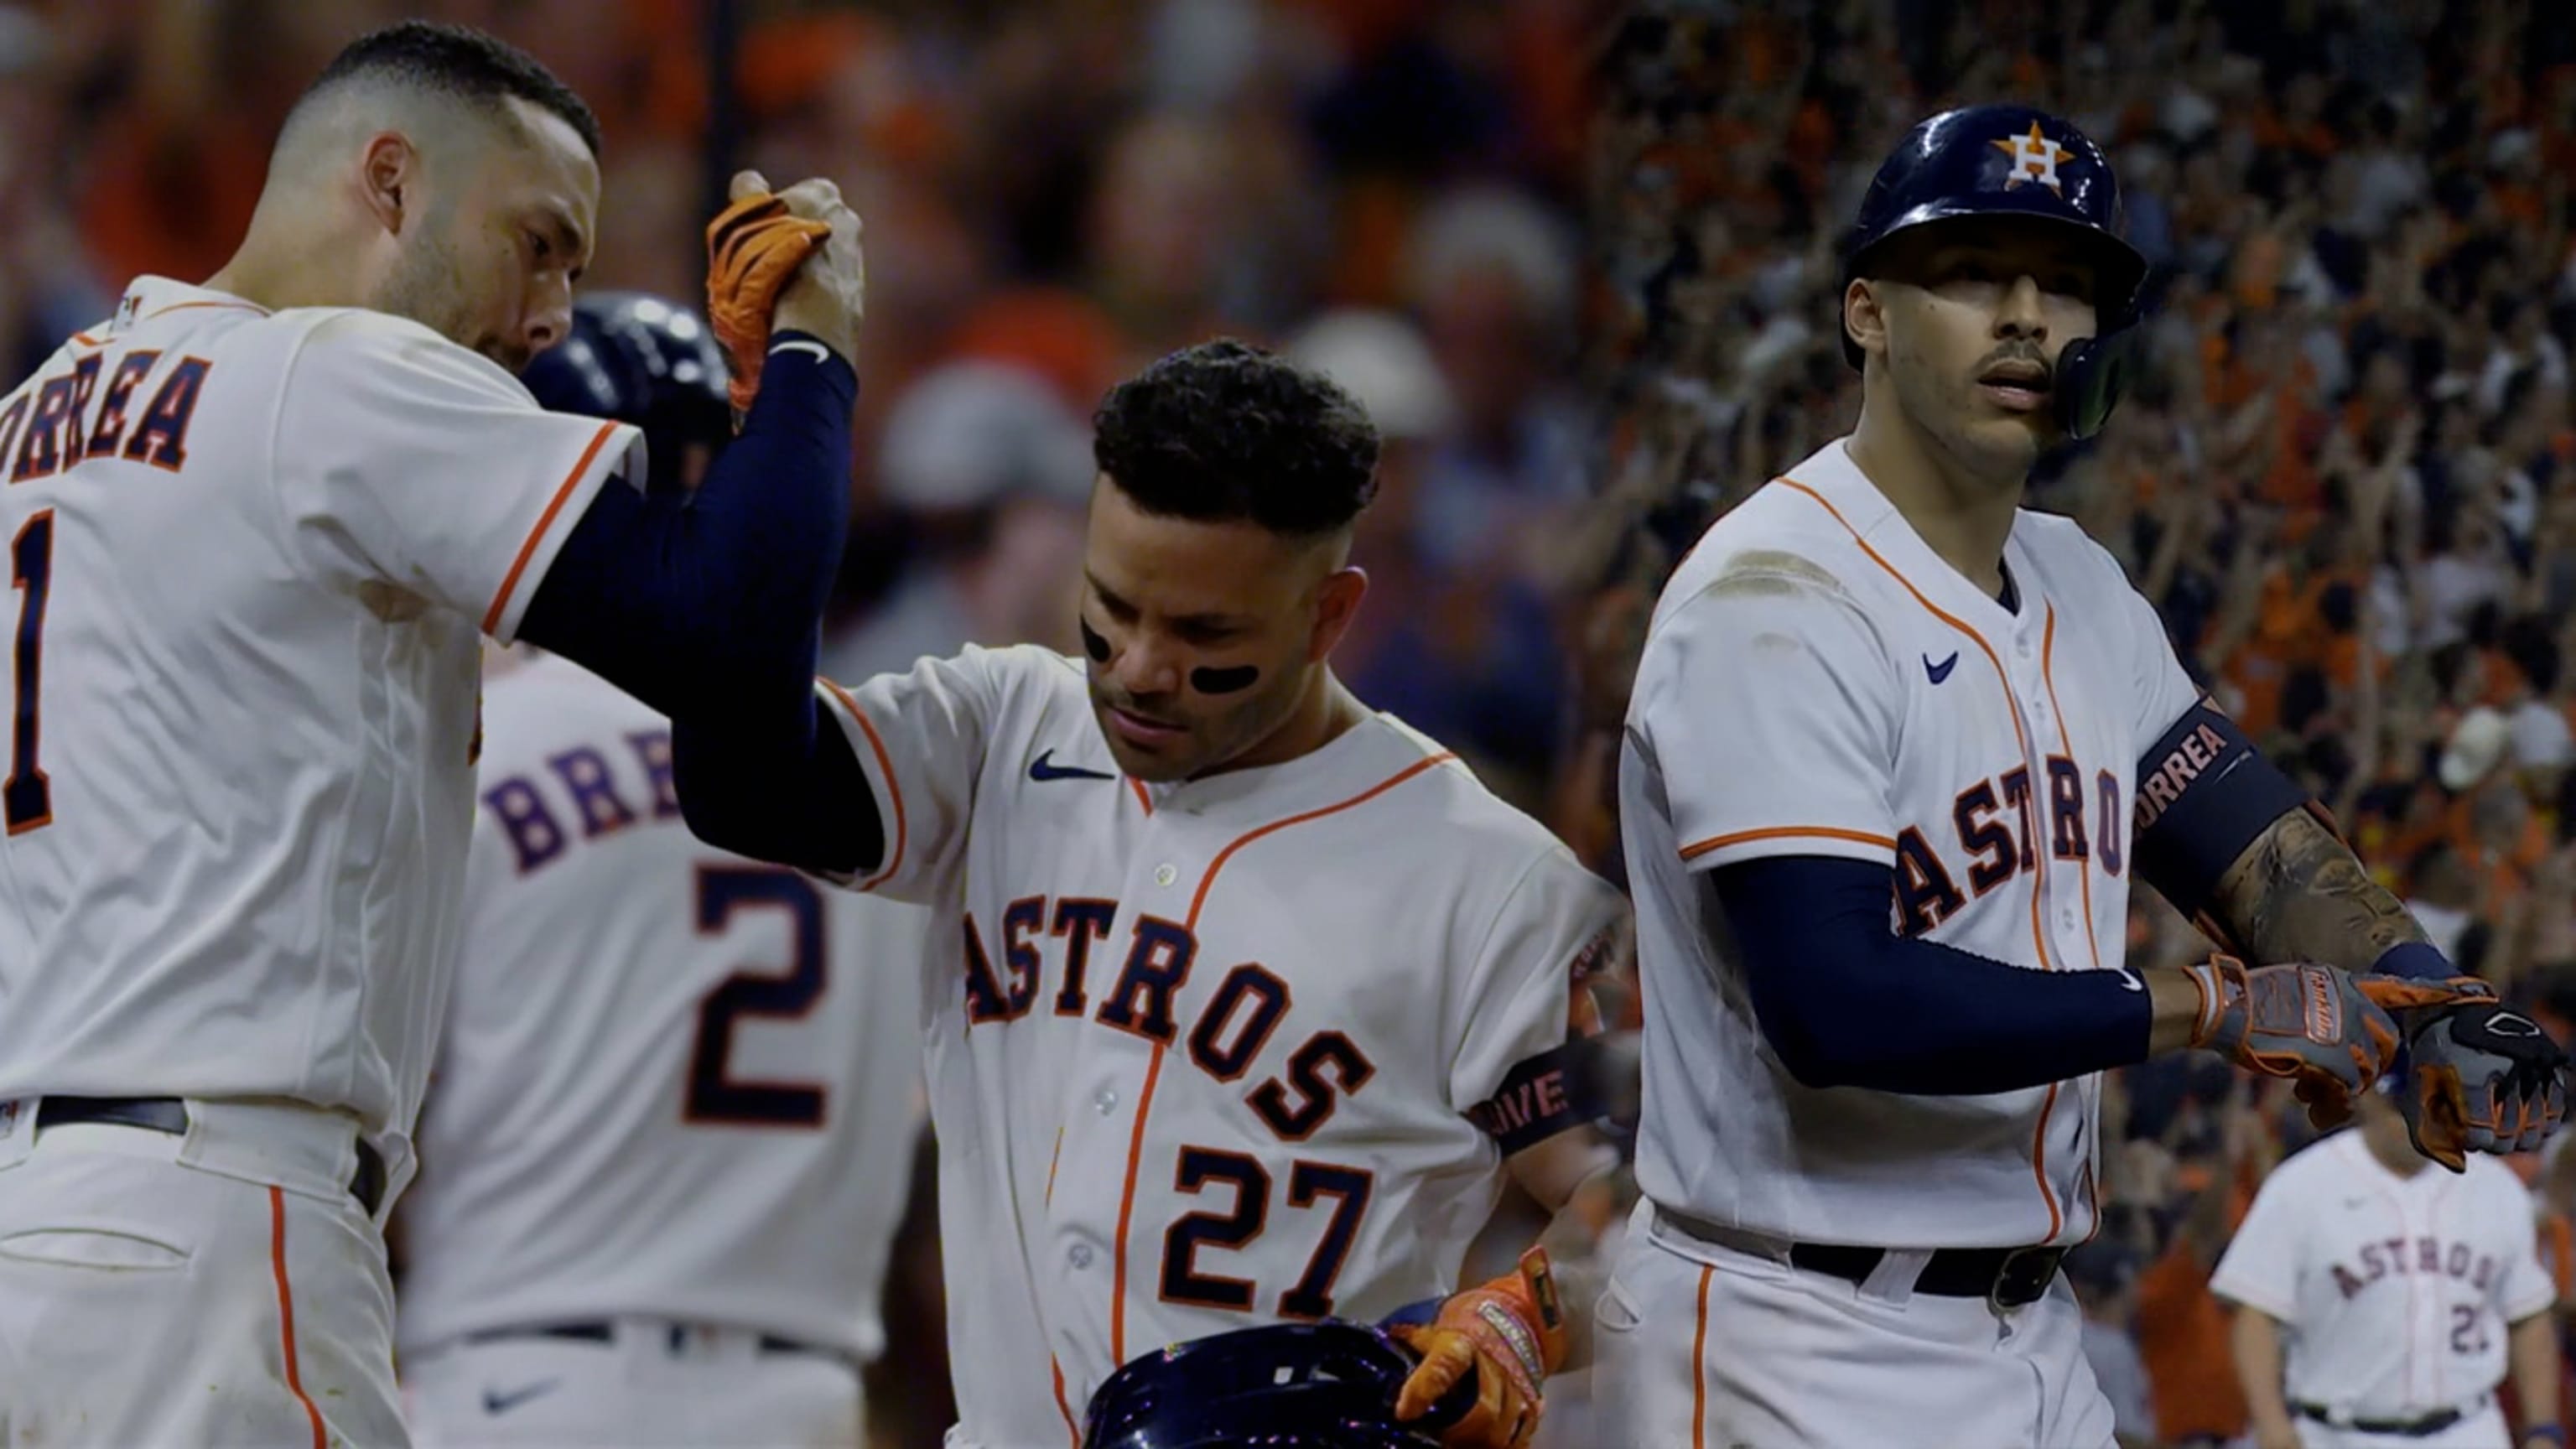 Houston Neighborhoods That Are a Home Run for Astros' Stars